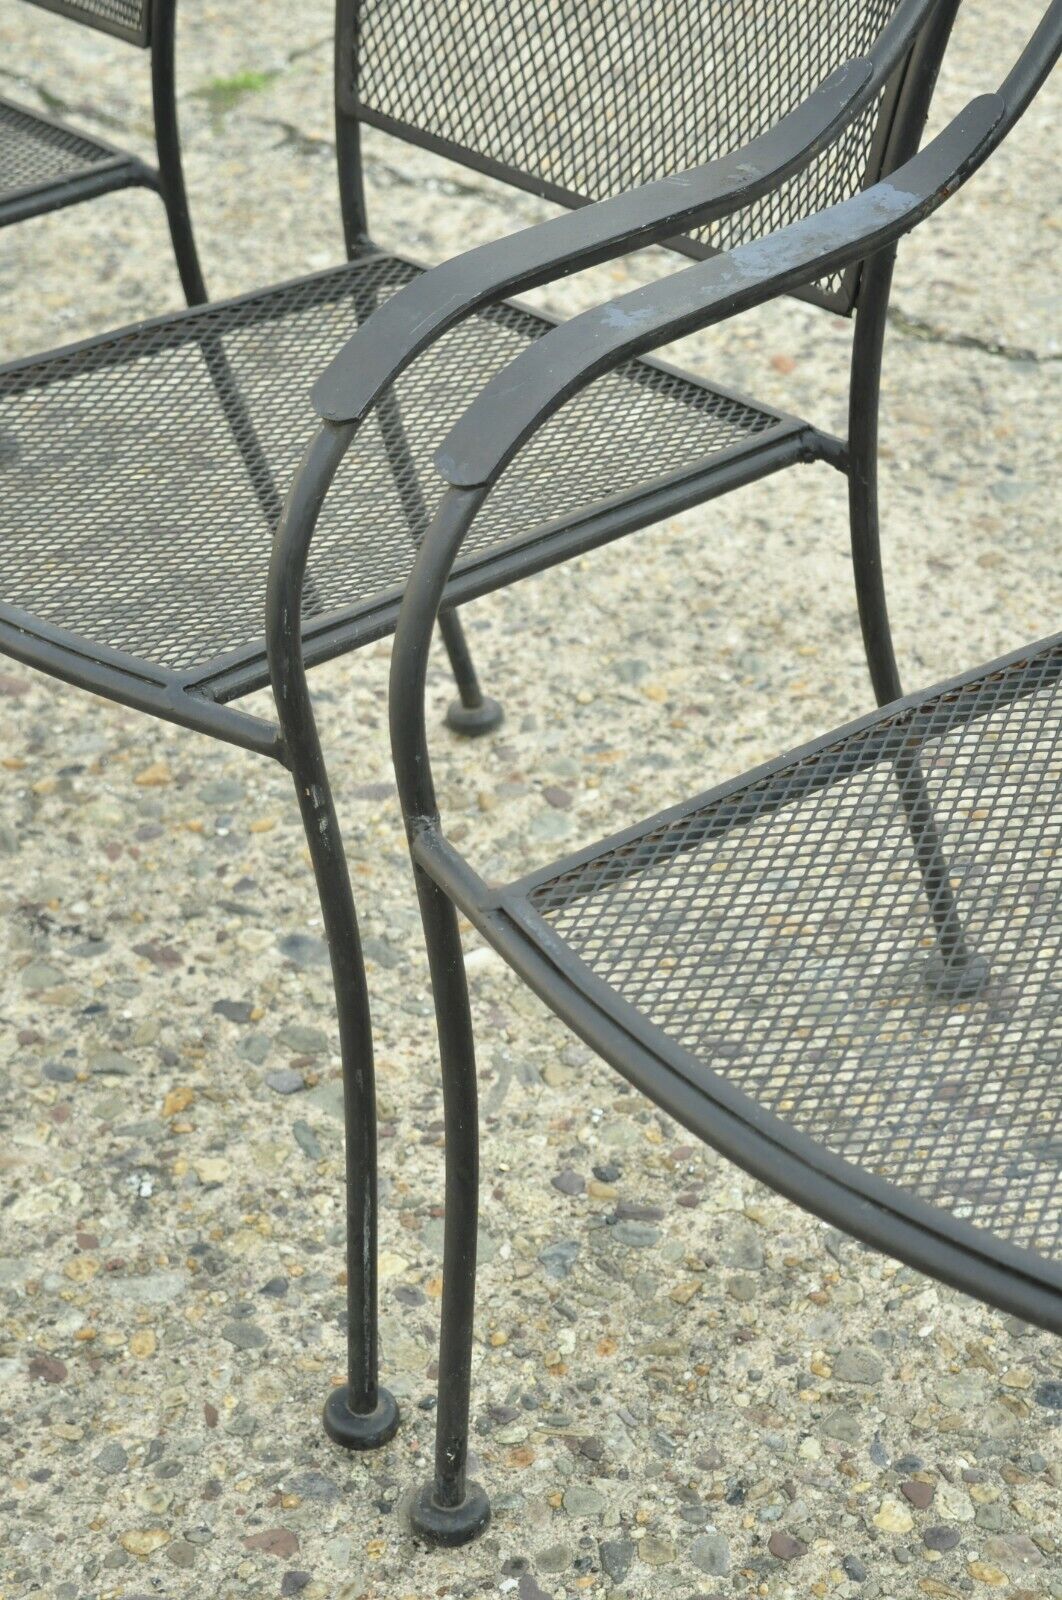 20th C Modern Wrought Iron Sculptural Black Outdoor Arm Chairs - Set of 4